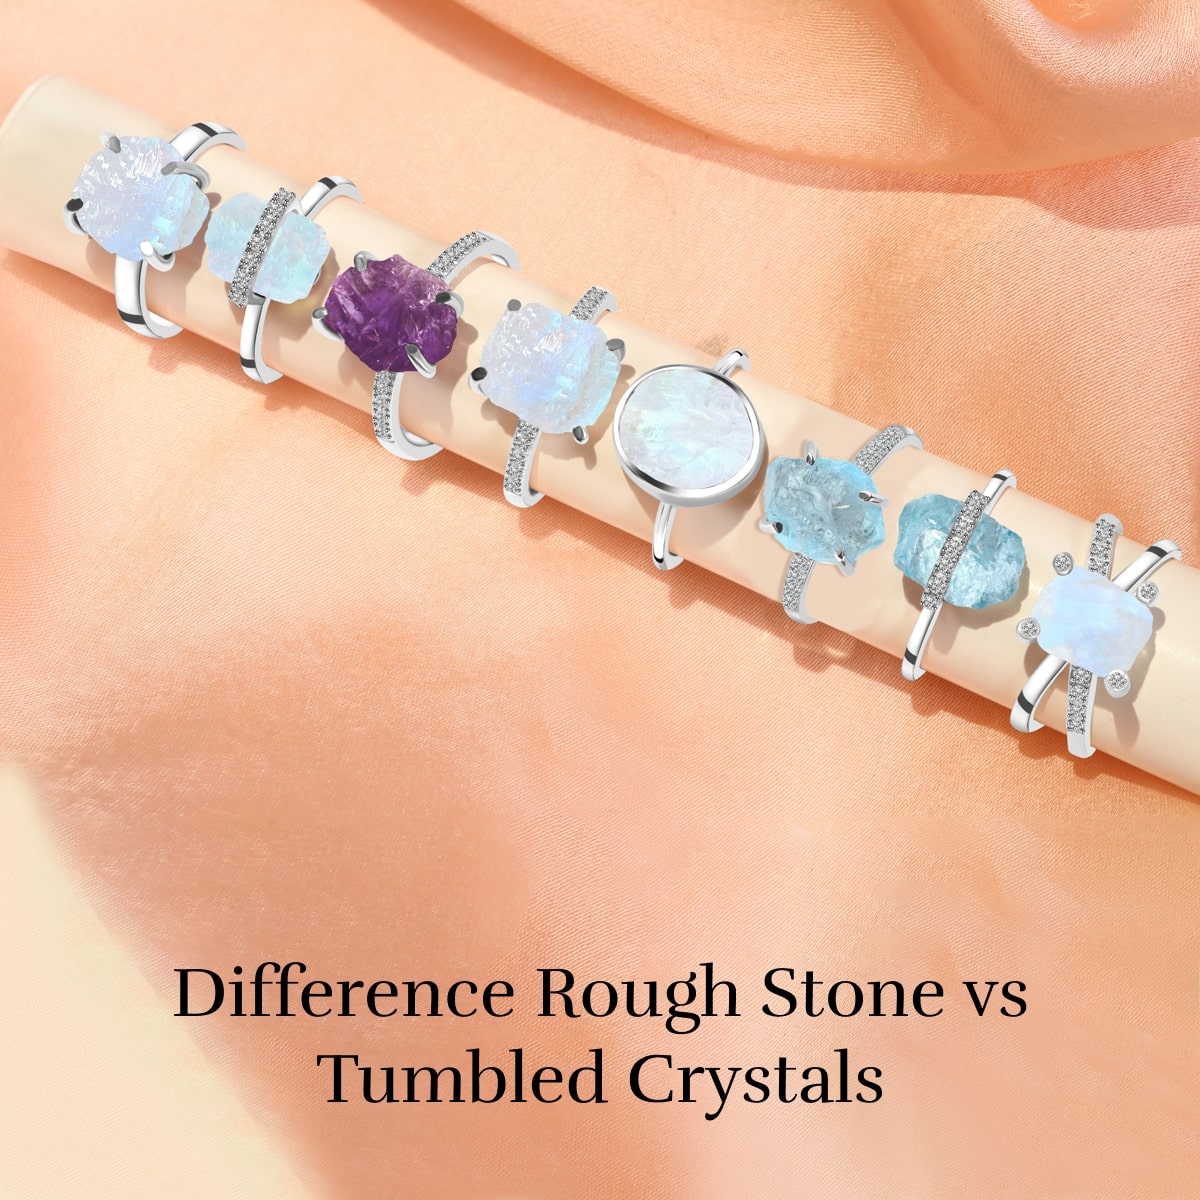 What Is The Difference Between Rough Stone and Tumbled Crystals